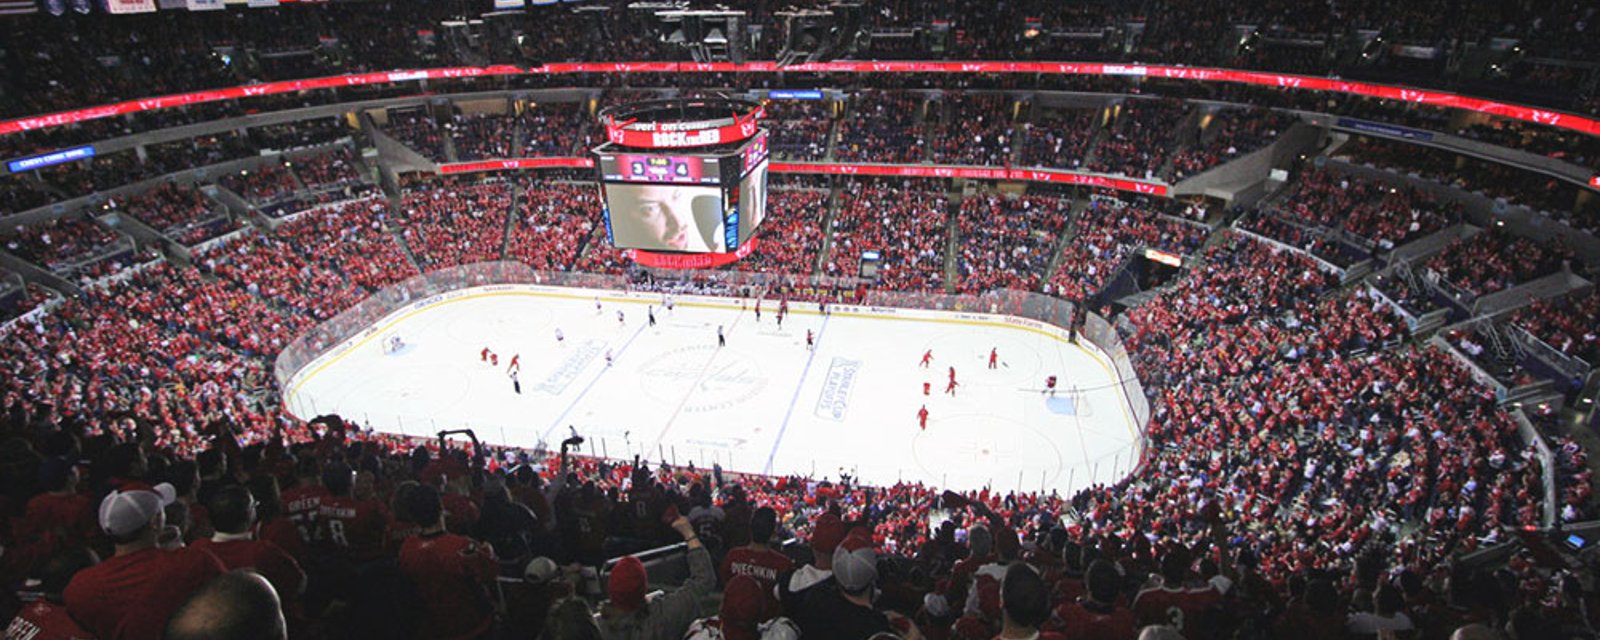 Report: NHL arena likely to be renamed 